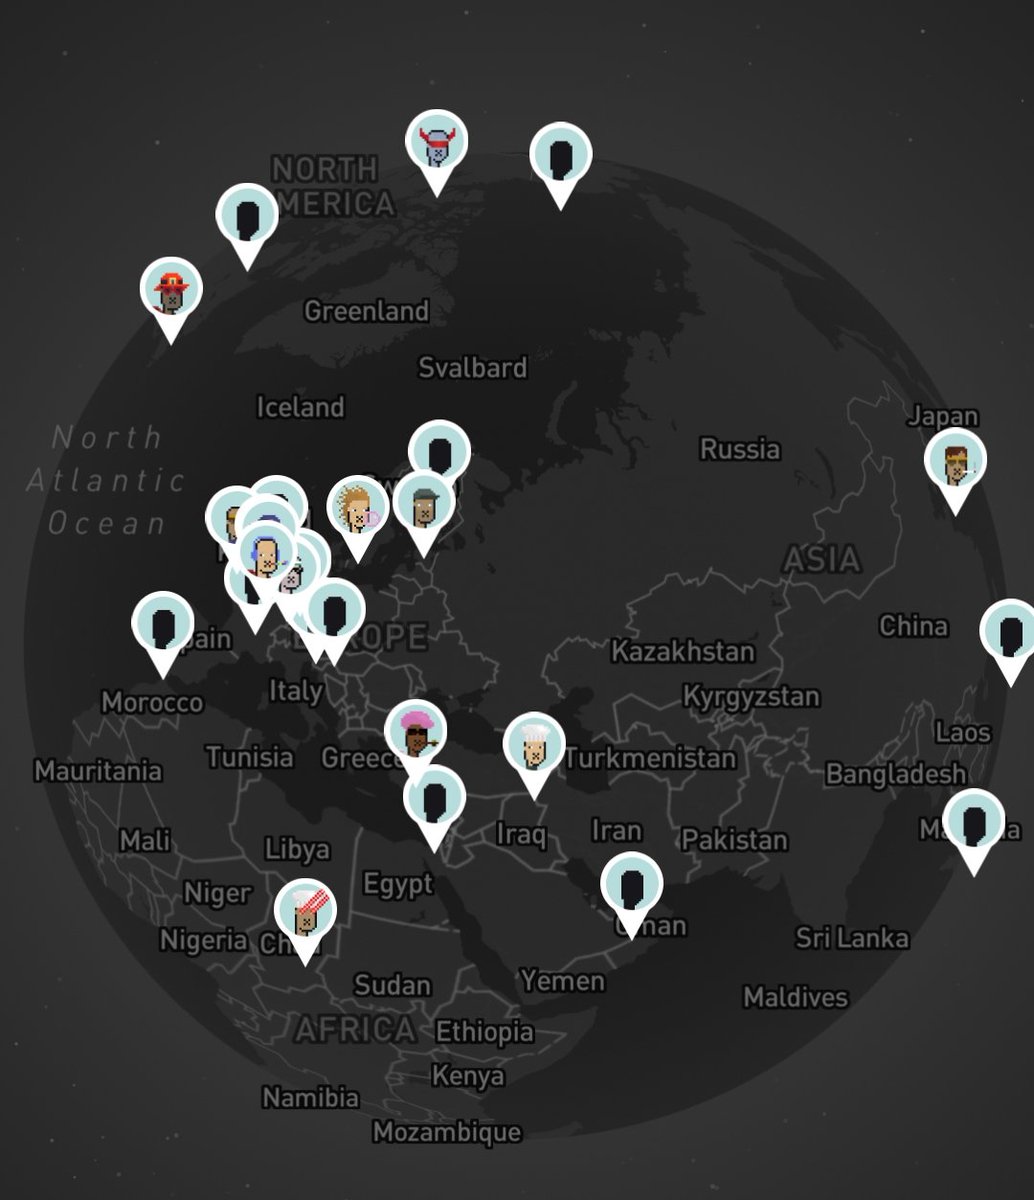 There are 2060 @XPUNKNFTs holders let's see if we can get all holders here on the world map 
Share and get the word out there
#NFTs 
#XRPLedger 
#NFTCommunity